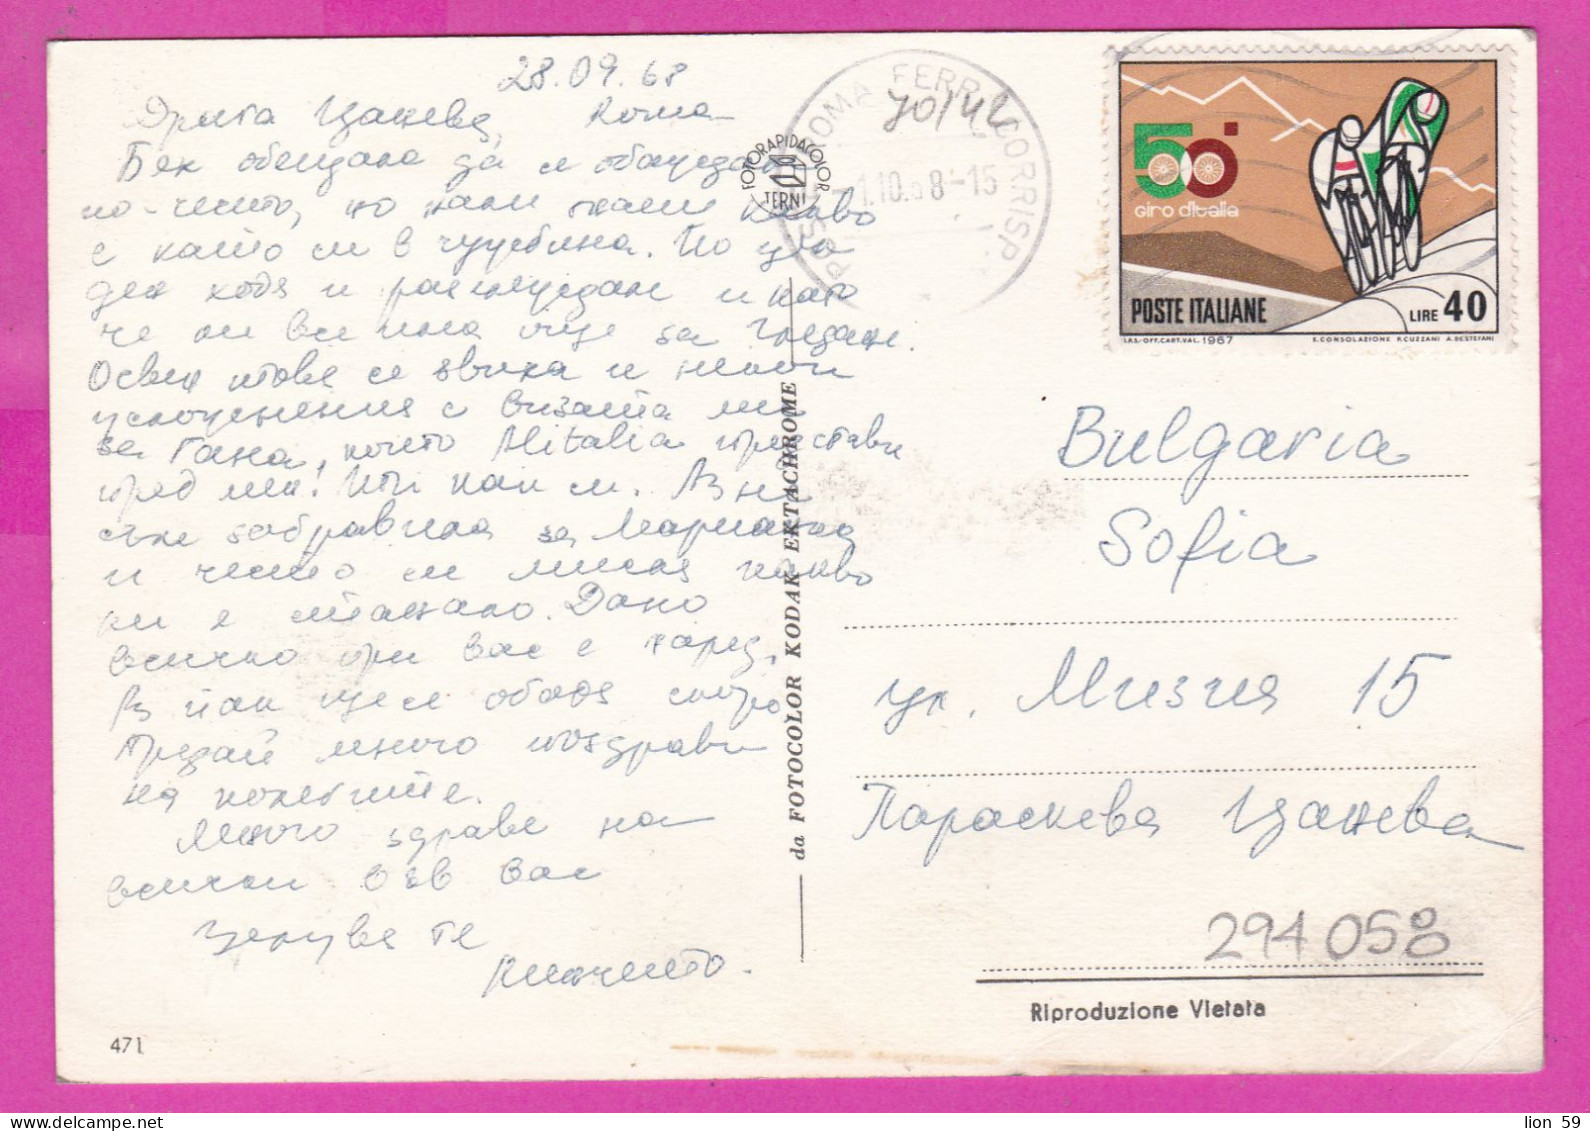 294058 / Italy - ROMA  6 View Night PC 1968 USED - 40 L 50th Ann Giro D'Italia Sport Cycling Cyclisme Radsport Bicycle - 1961-70: Poststempel